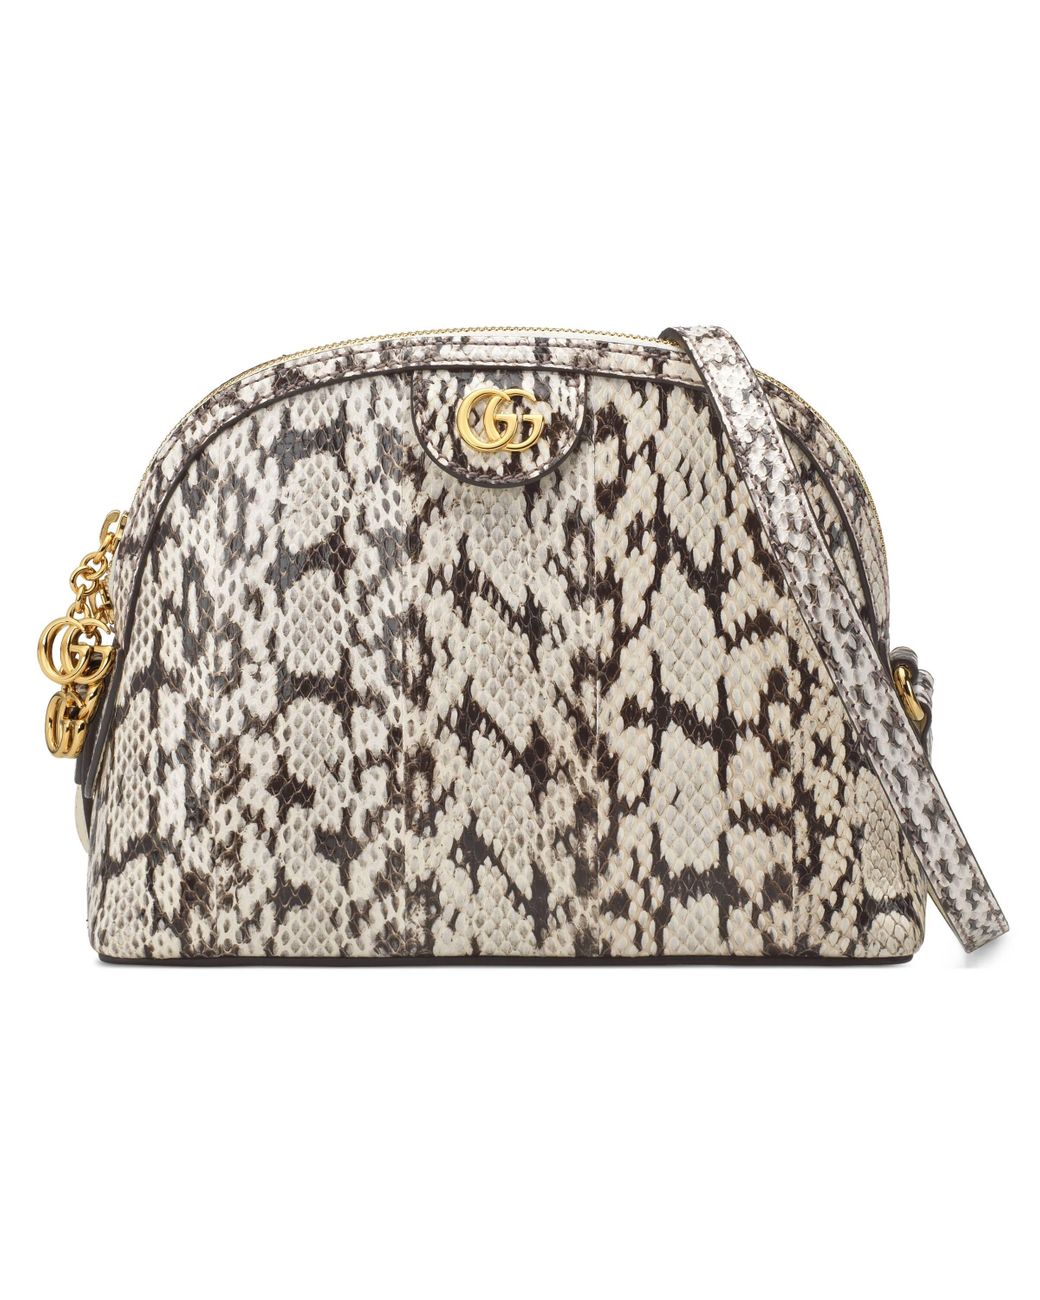 Gucci Ophidia Small Snakeskin Shoulder Bag - Save 6% - Lyst